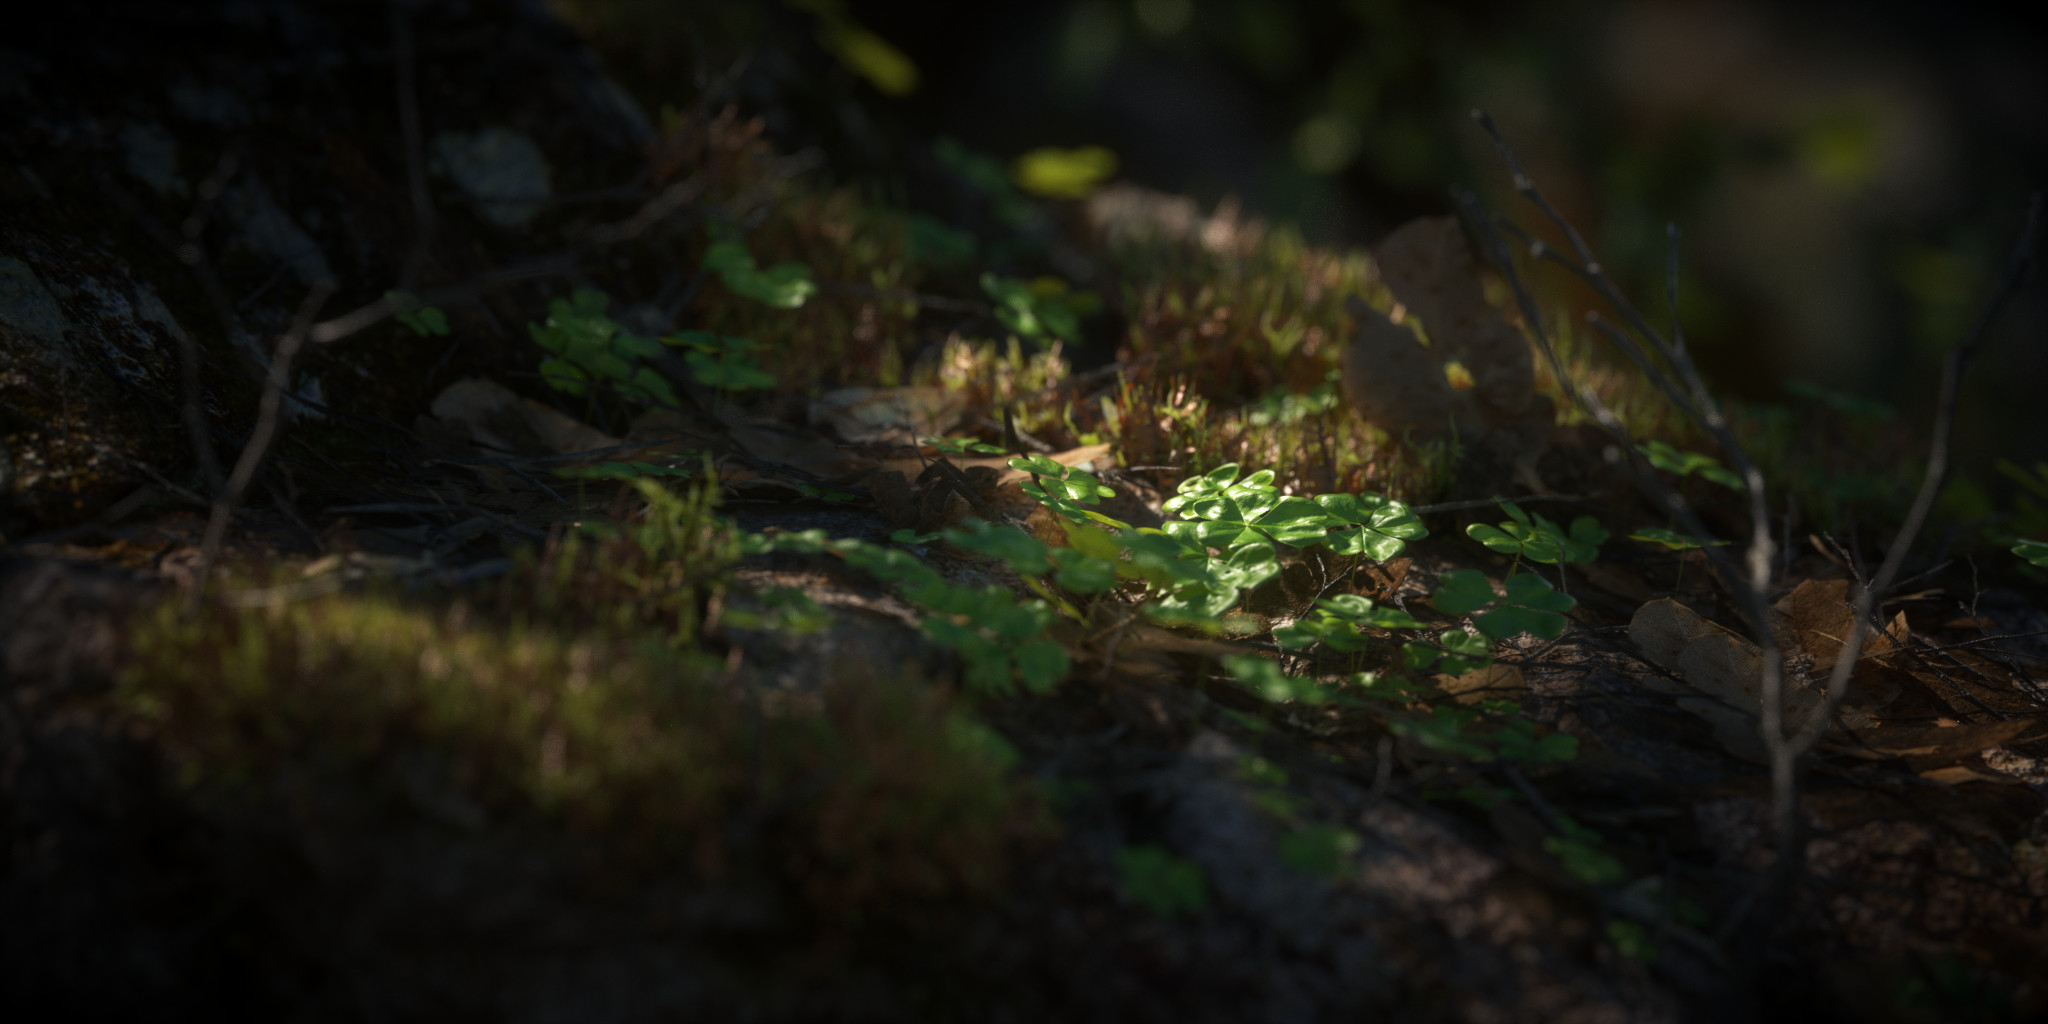 Direct frame from Octane - no post work was done in this image